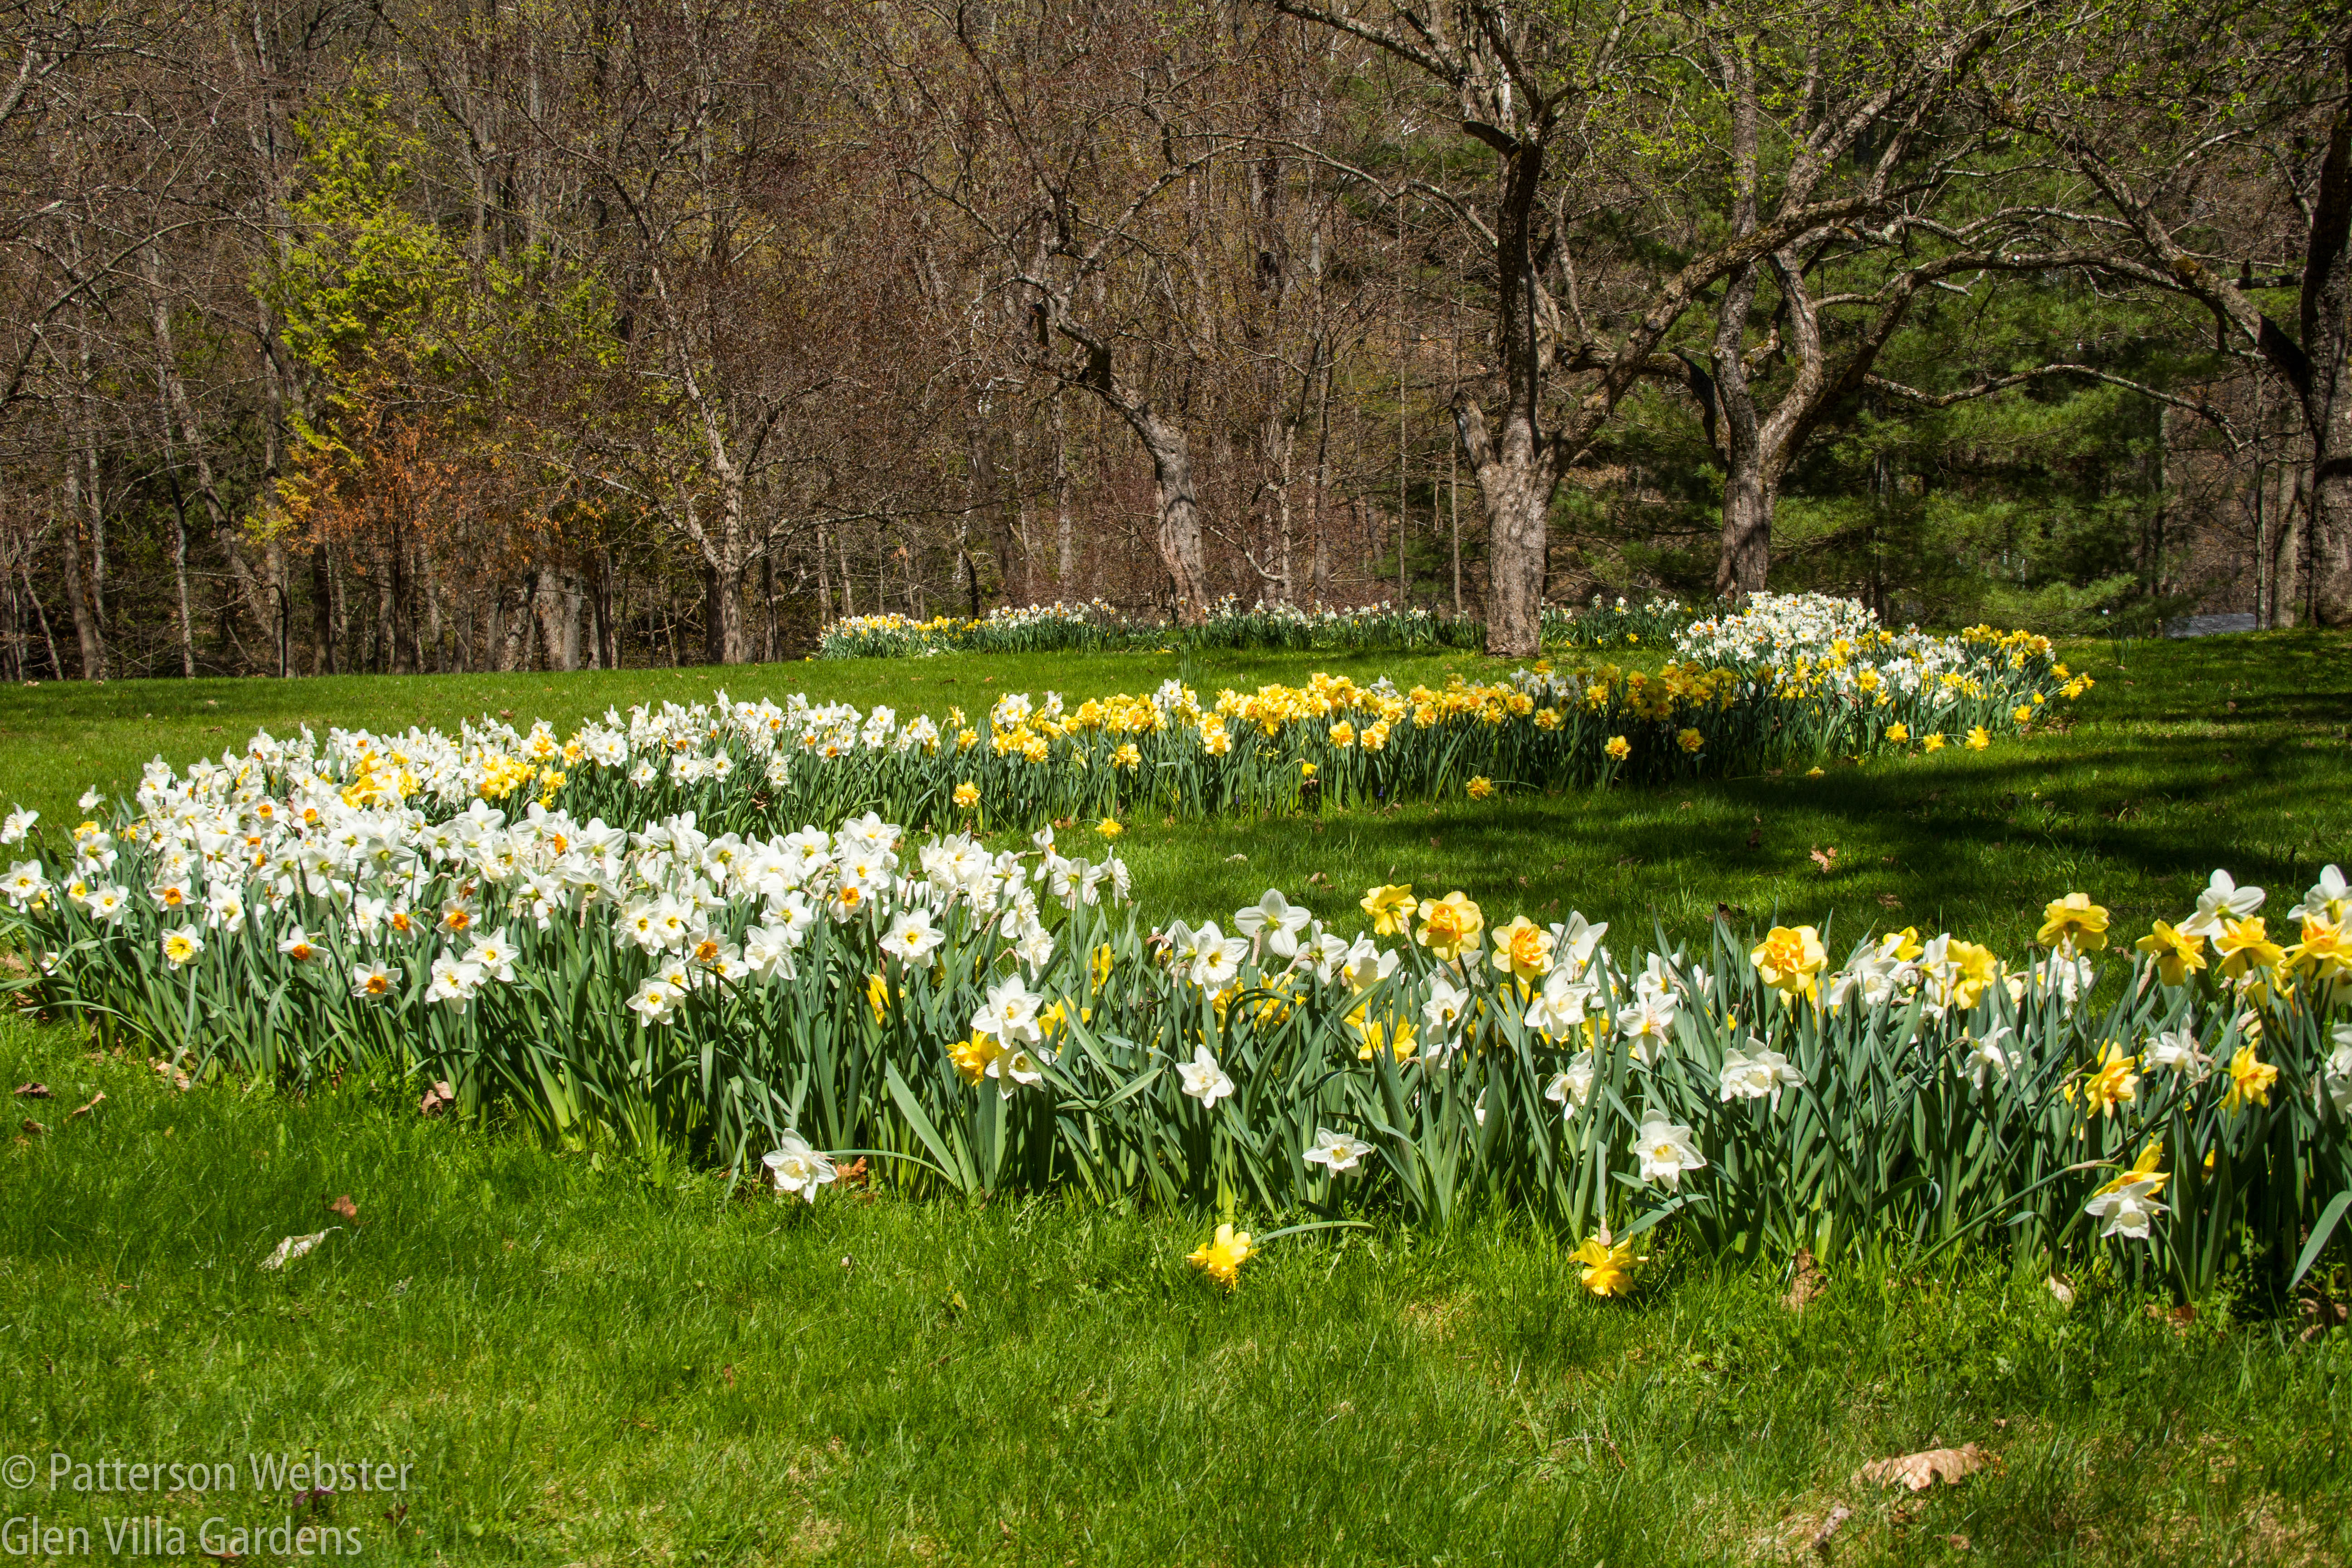 Daffodils scribble their way across the grass at the Dragon's Tail.